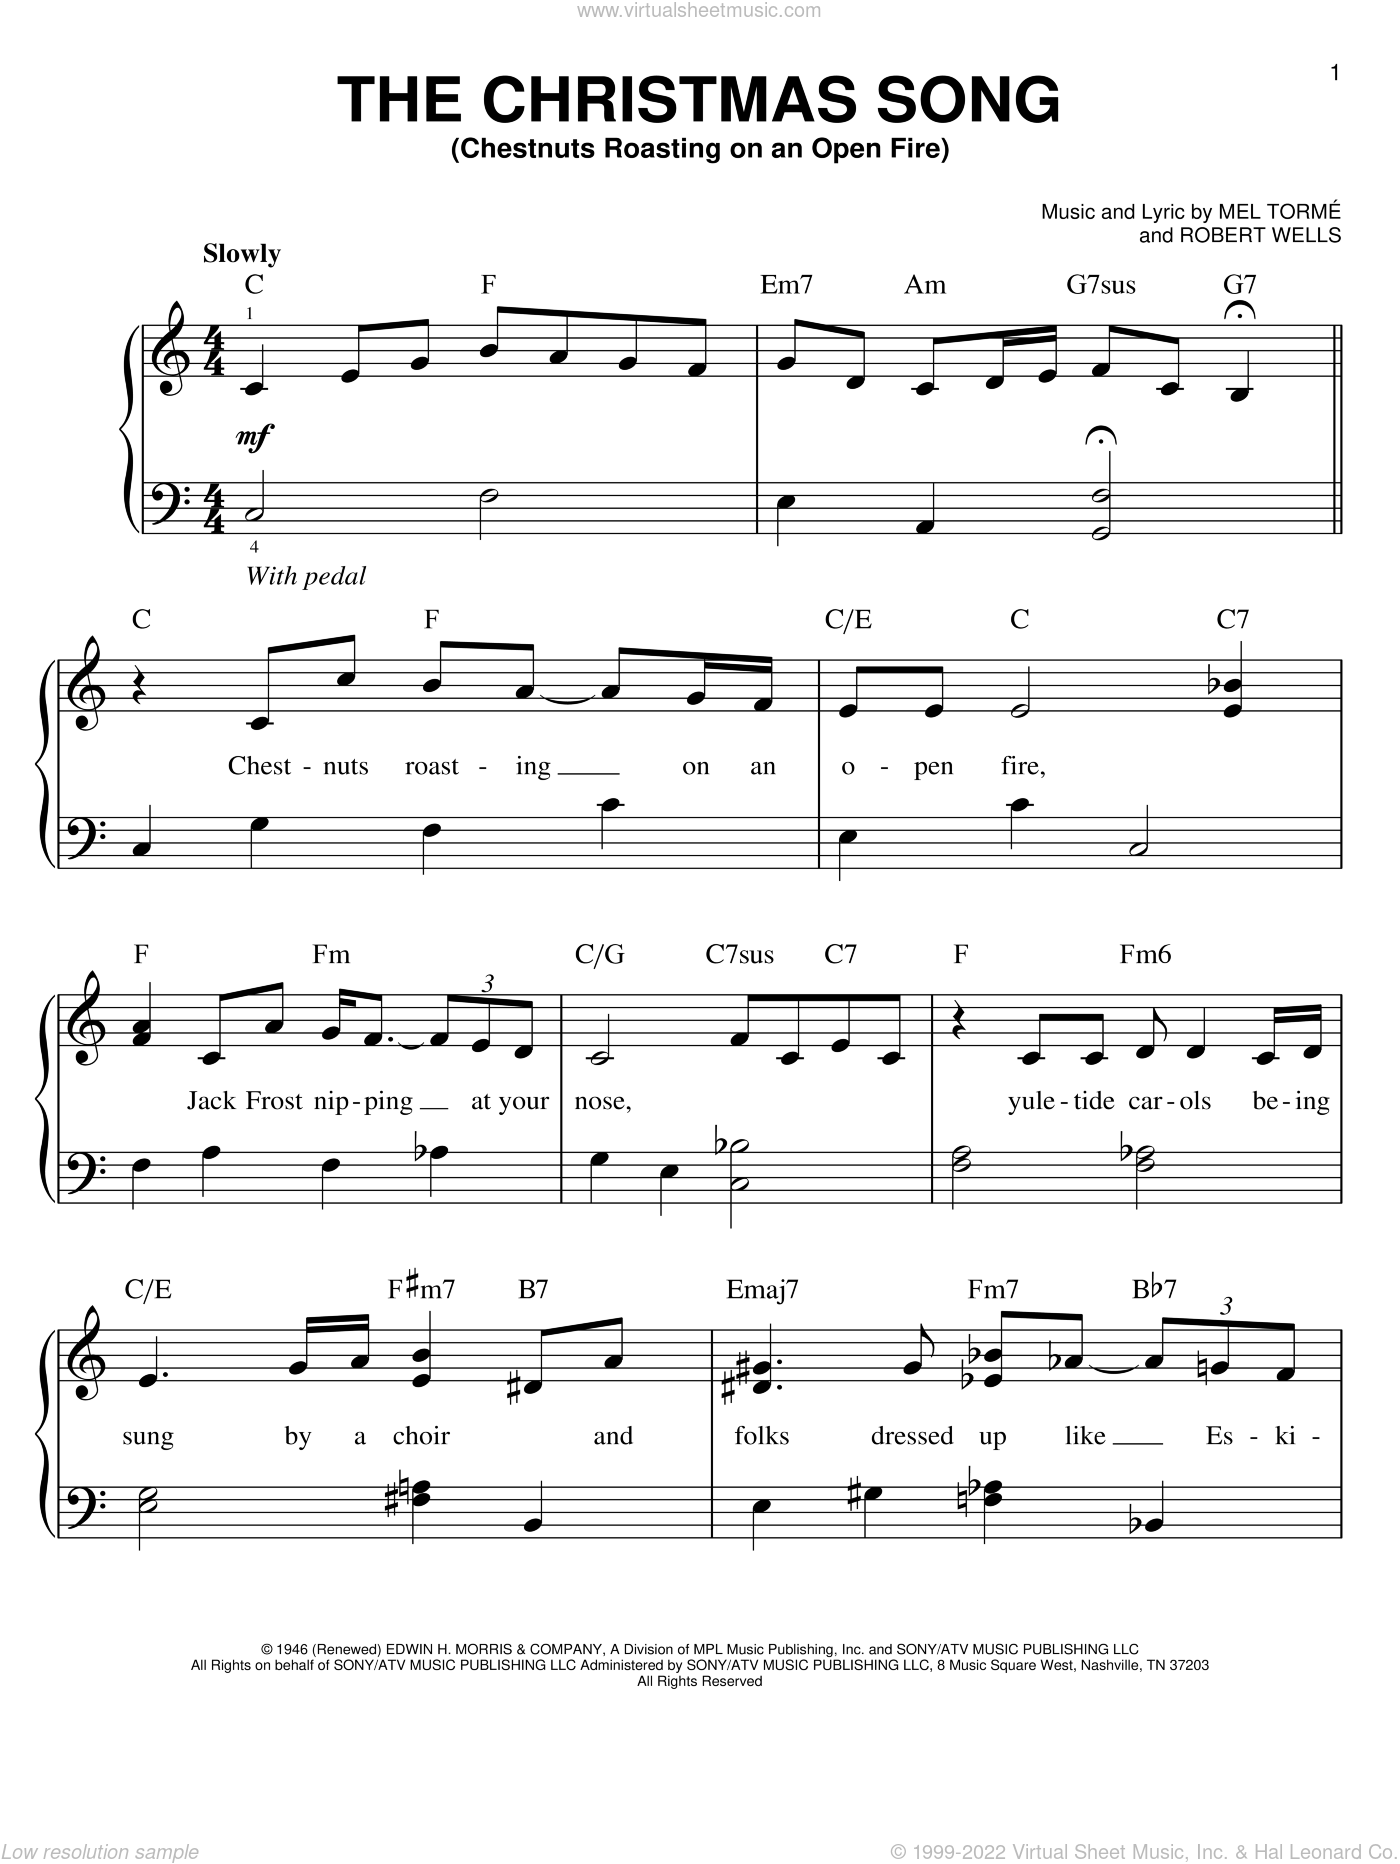 Groban - The Christmas Song (Chestnuts Roasting On An Open Fire) sheet music for piano solo